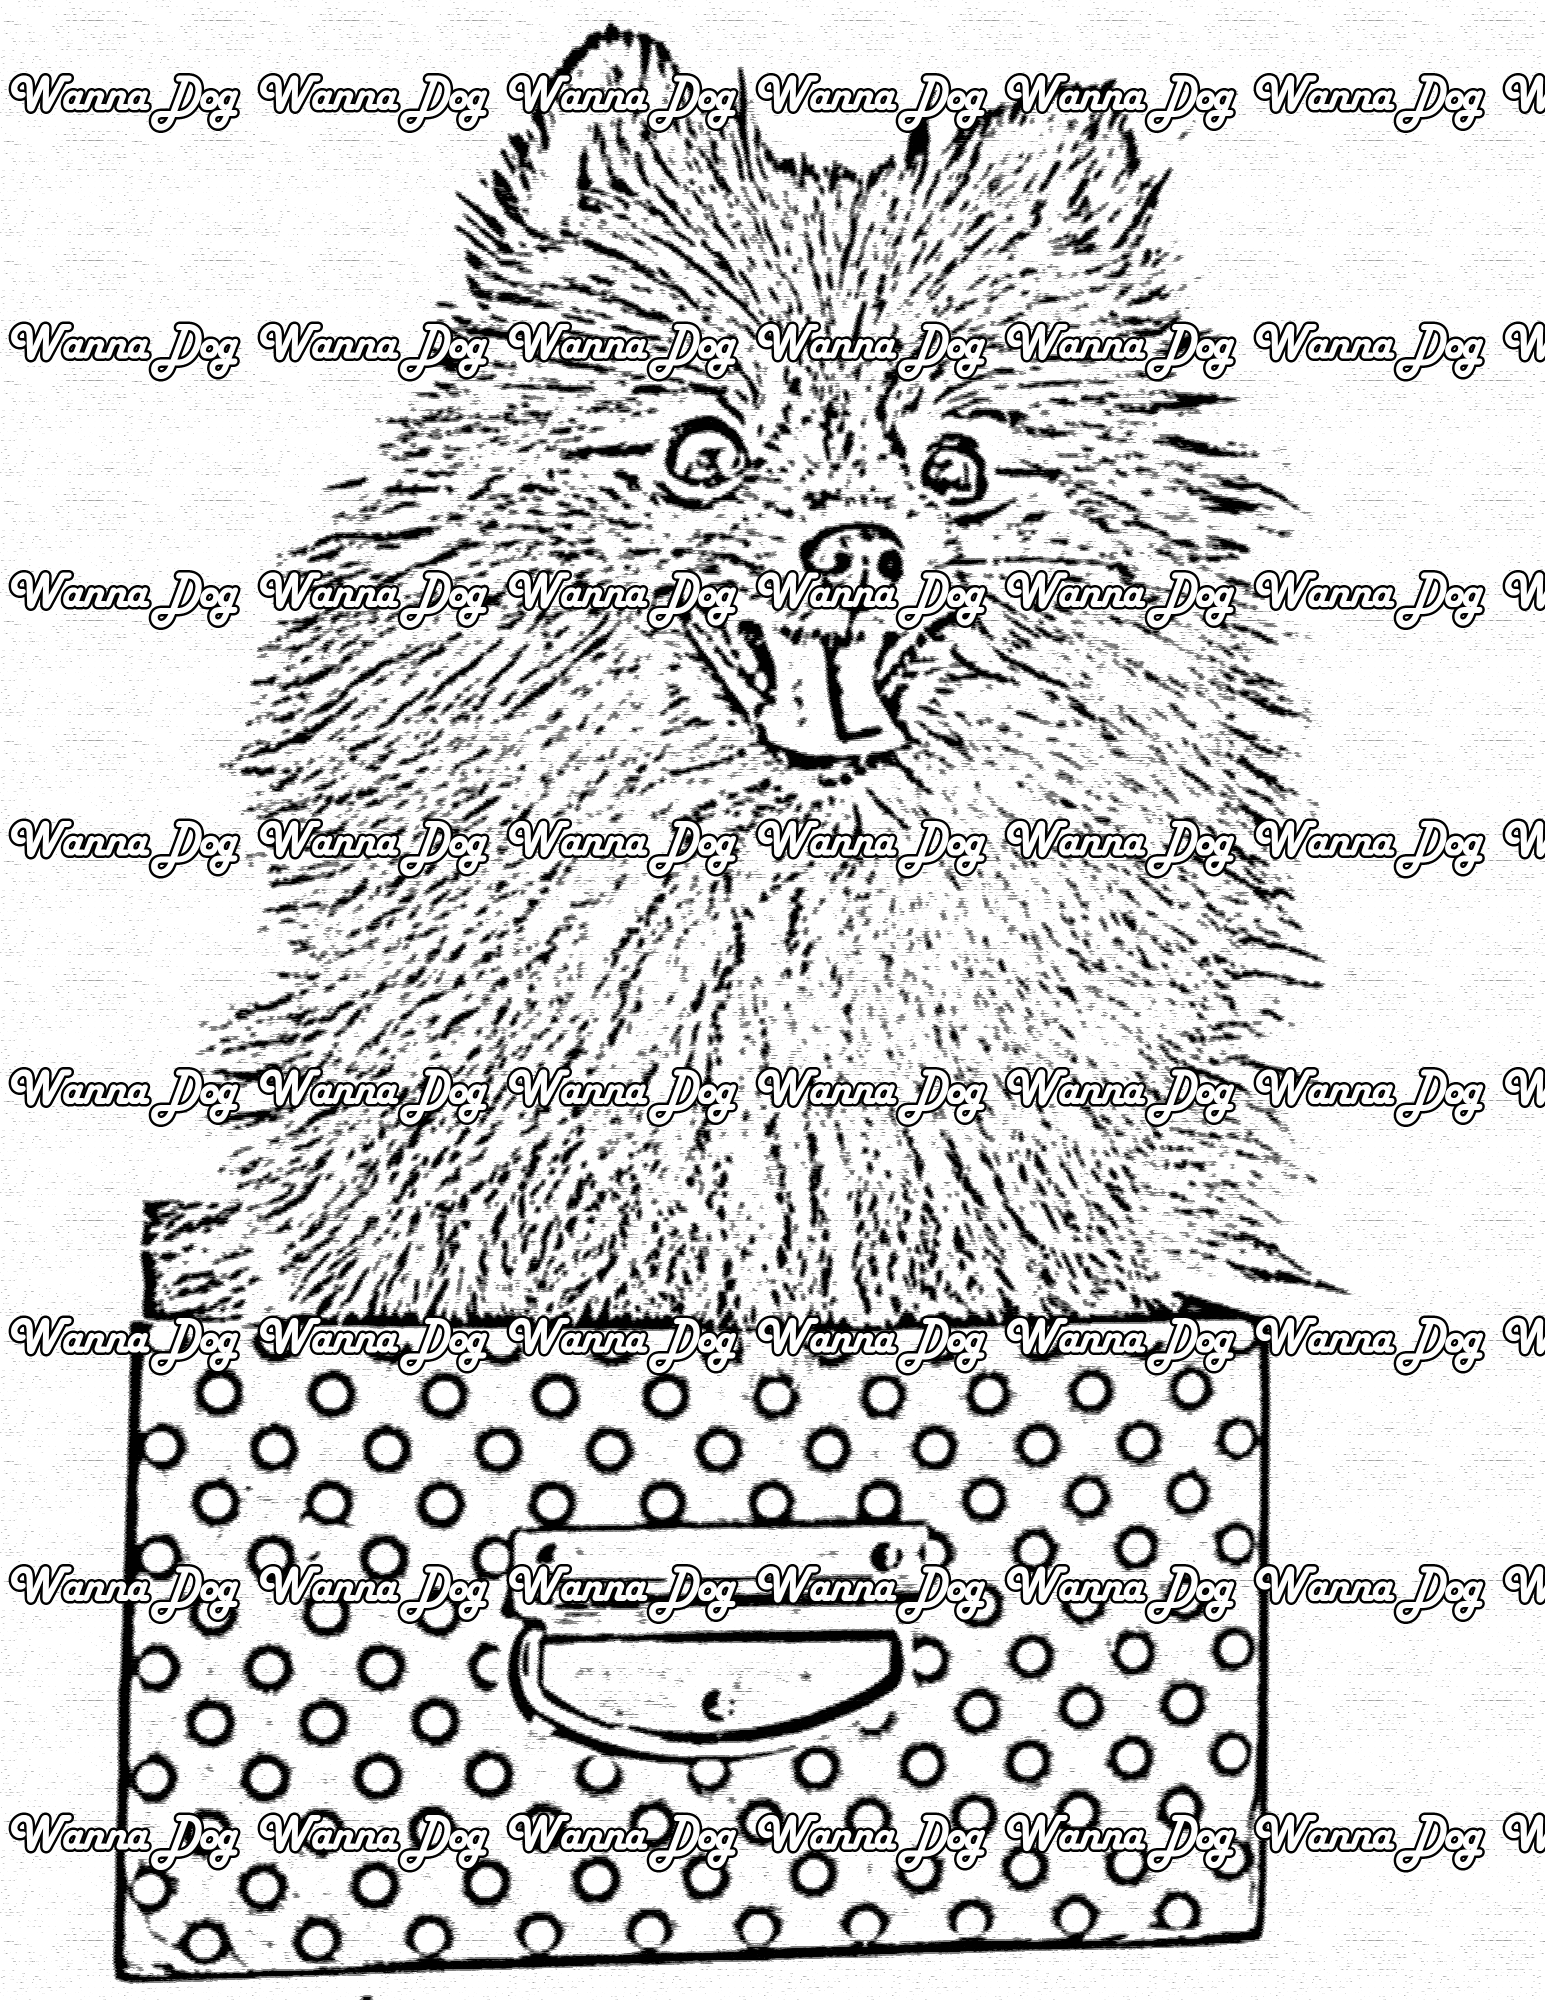 Pomeranian Coloring Page of a Pomeranian sitting down and smiling